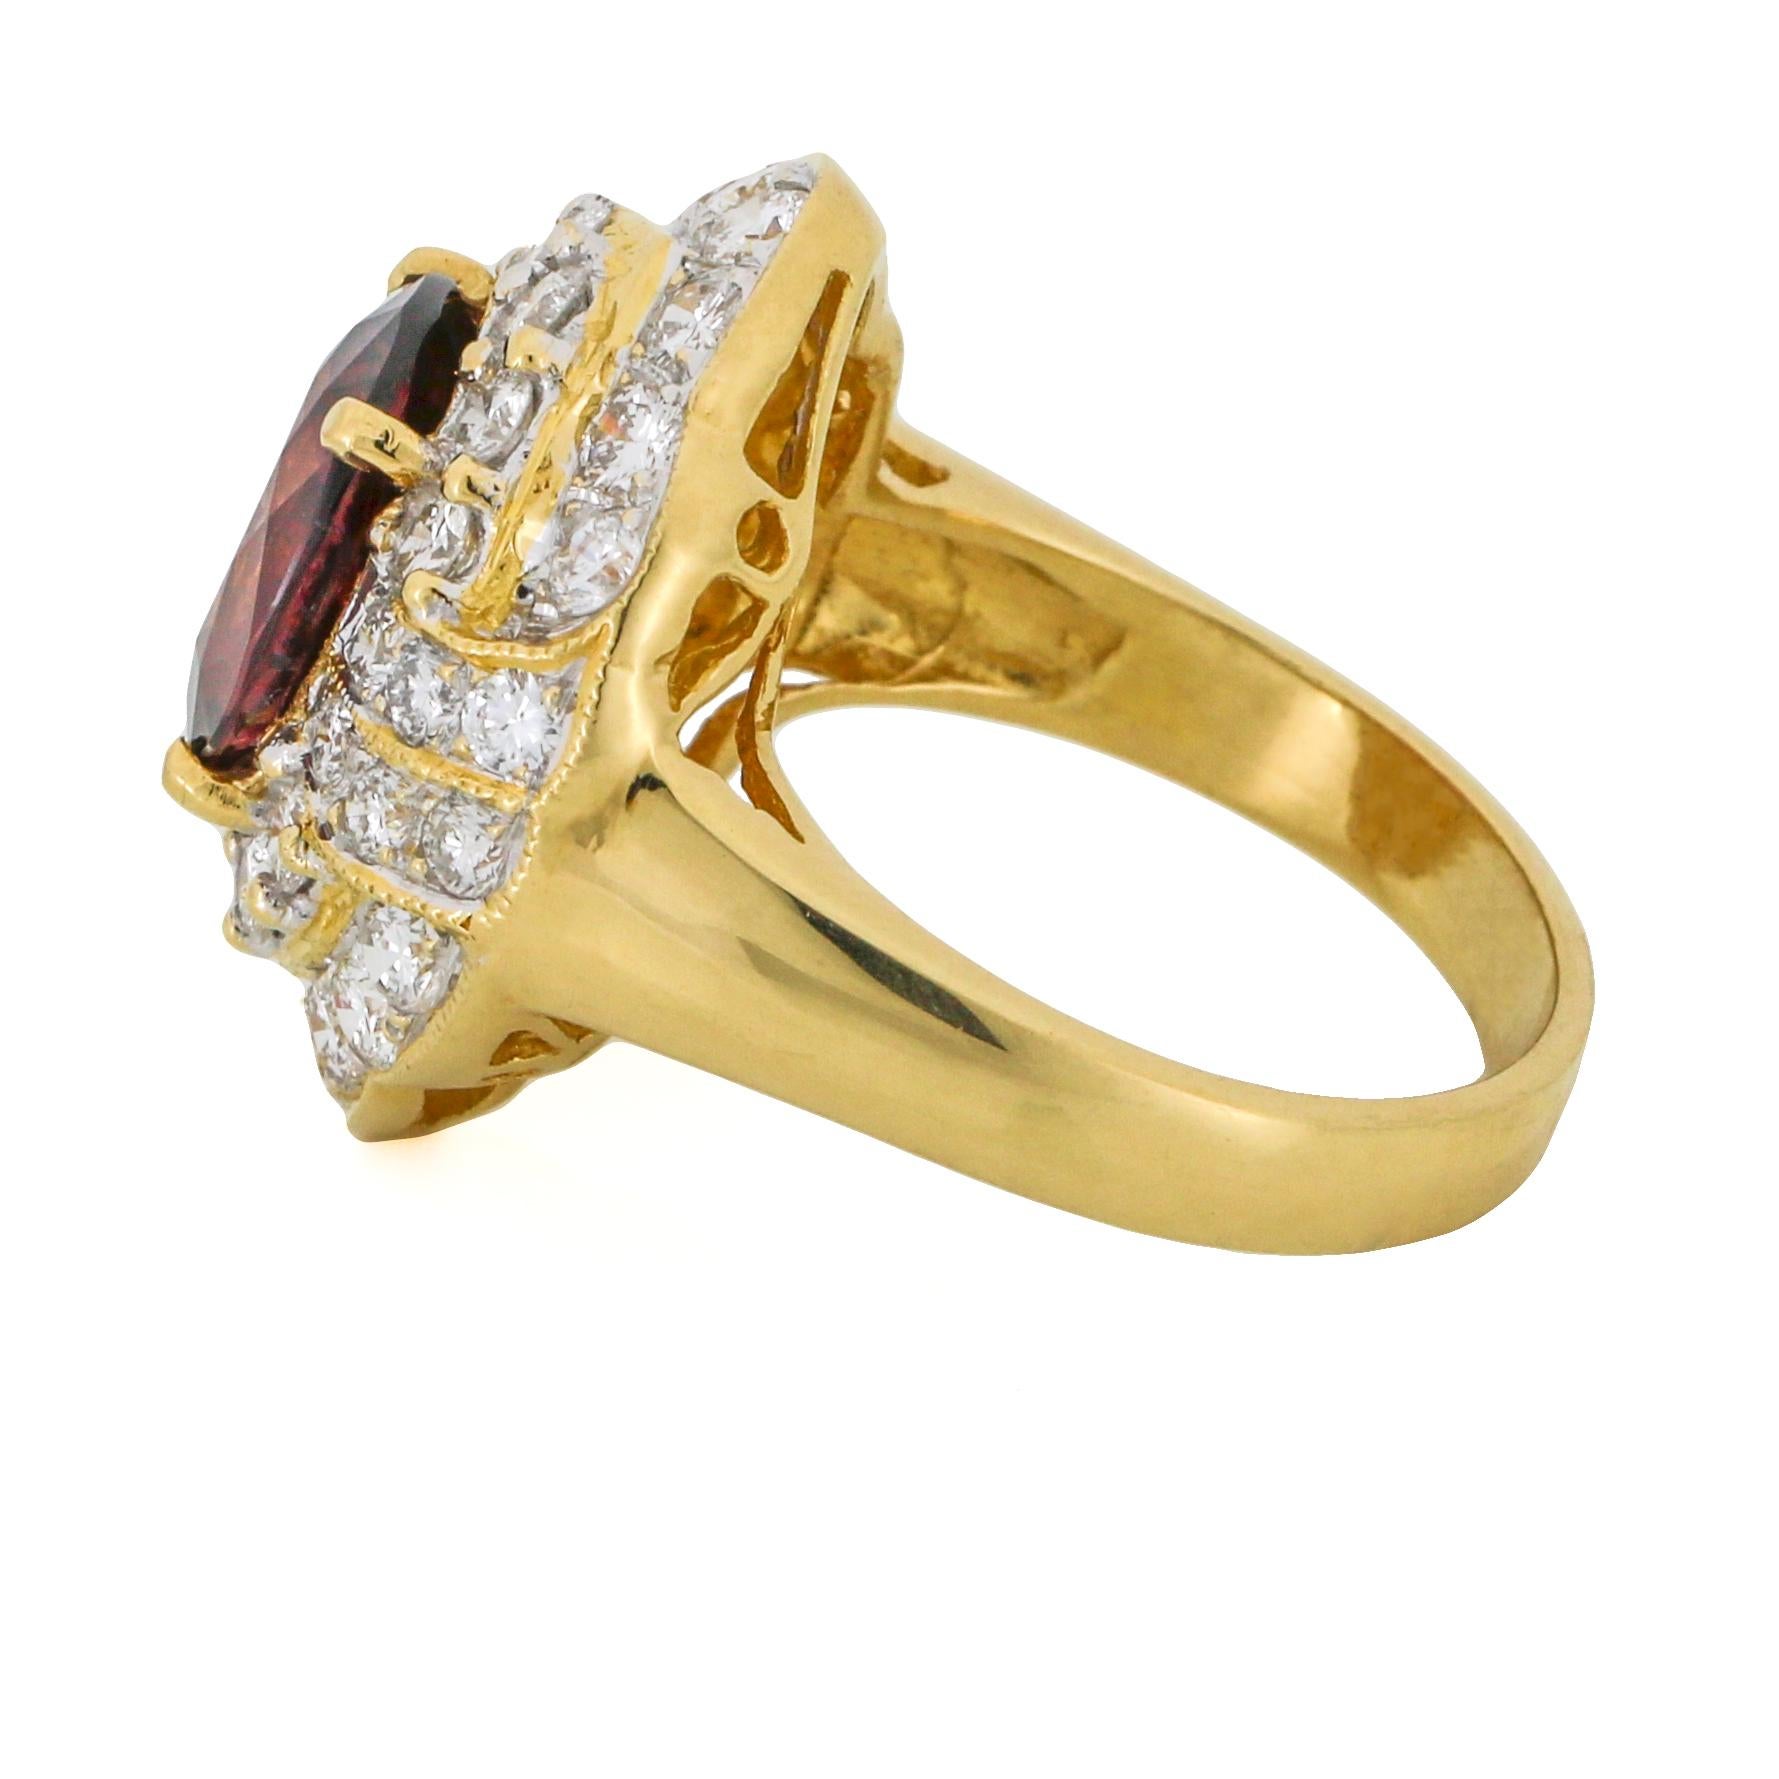 GIA 3.25 Carat Red Spinel Diamond Cocktail Ring in 18 Karat Yellow Gold For Sale 2